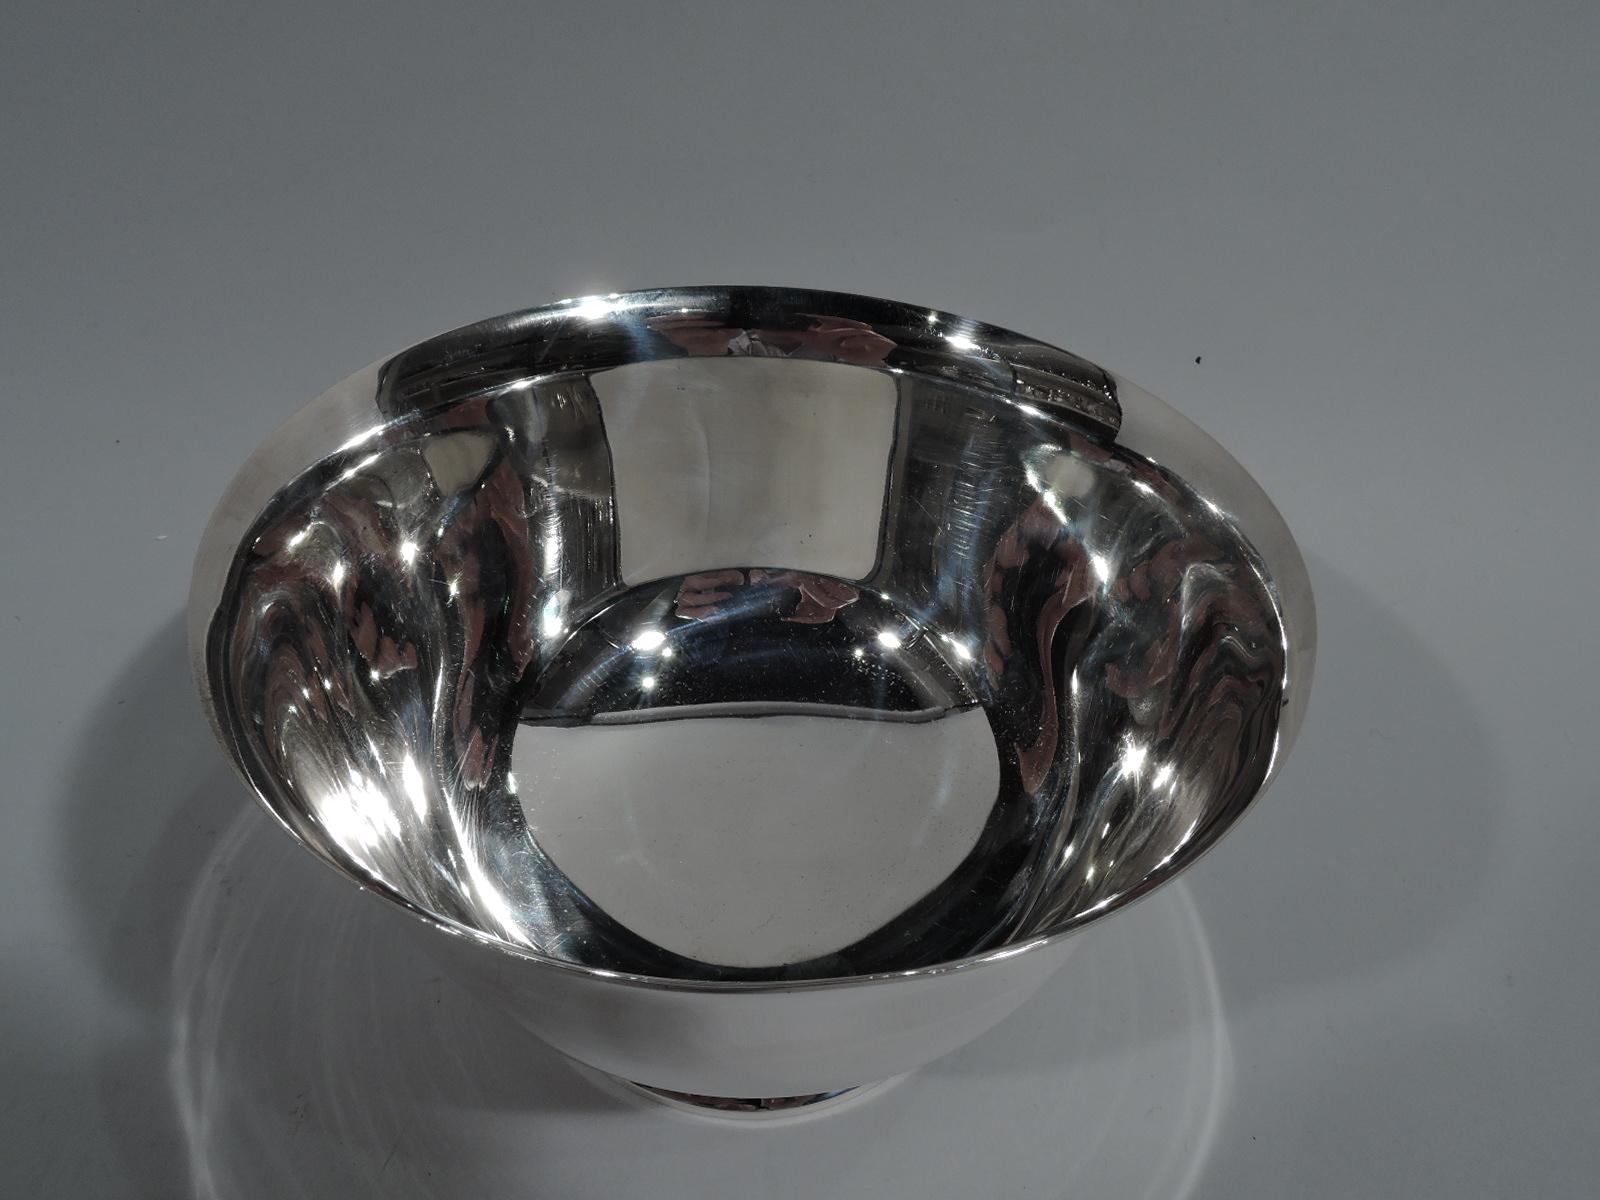 Sterling silver Revere bowl. Made by Tiffany & Co. in New York. Curved sides, flared rim, and stepped foot. A nice small version of a traditional form. Hallmark includes postwar pattern no. 23615 and director’s letter L (circa 1956-1965). Weight: